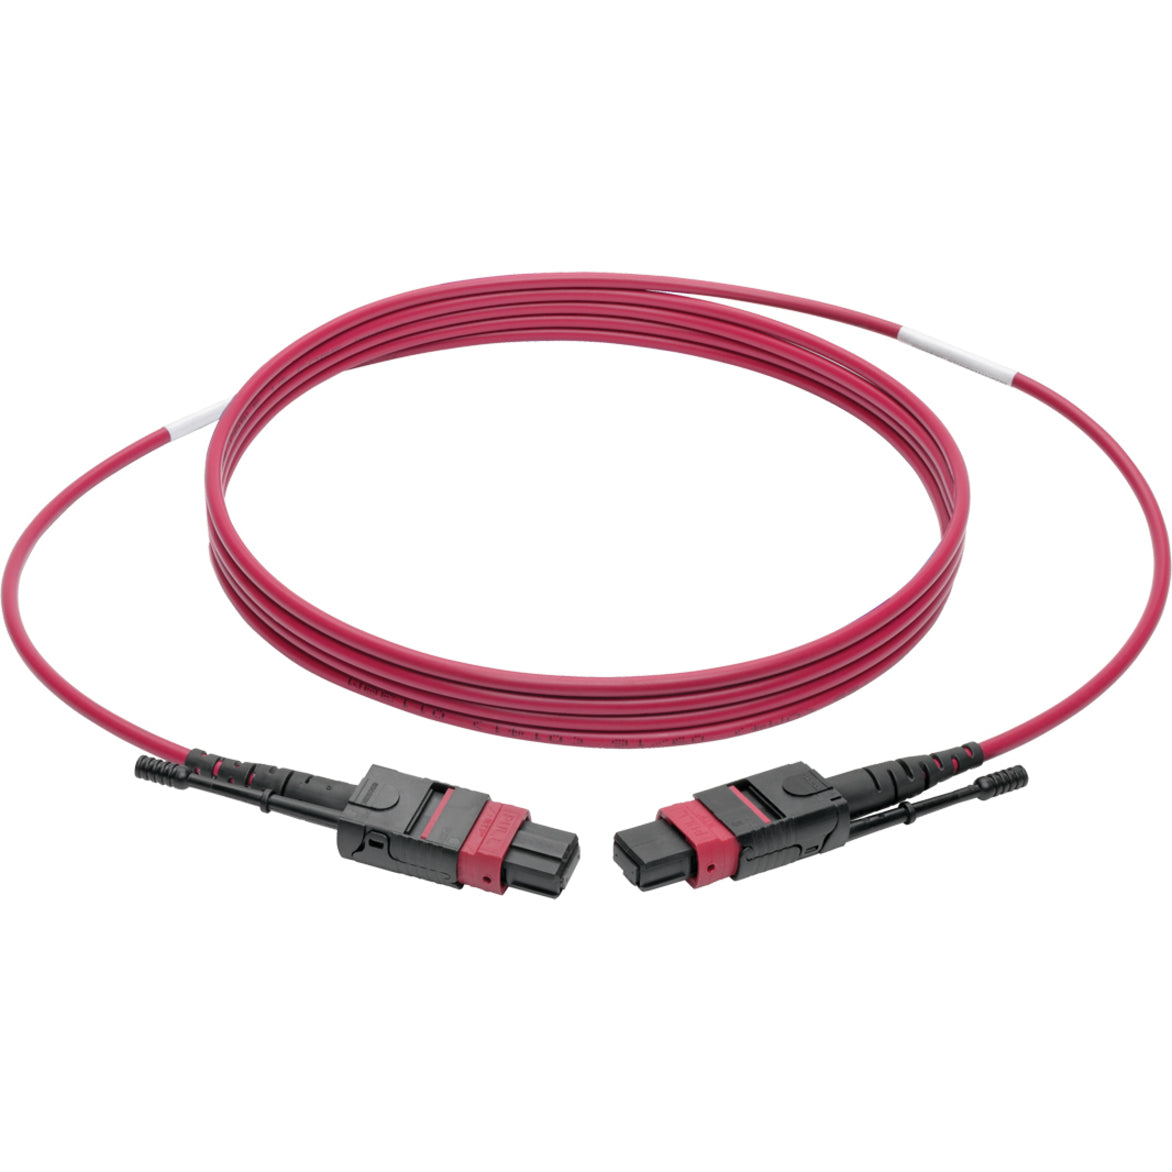 Tripp Lite N845-01M-12-MG MTP/MPO Multimode Patch Cable, Magenta, 1m, 100 Gbit/s